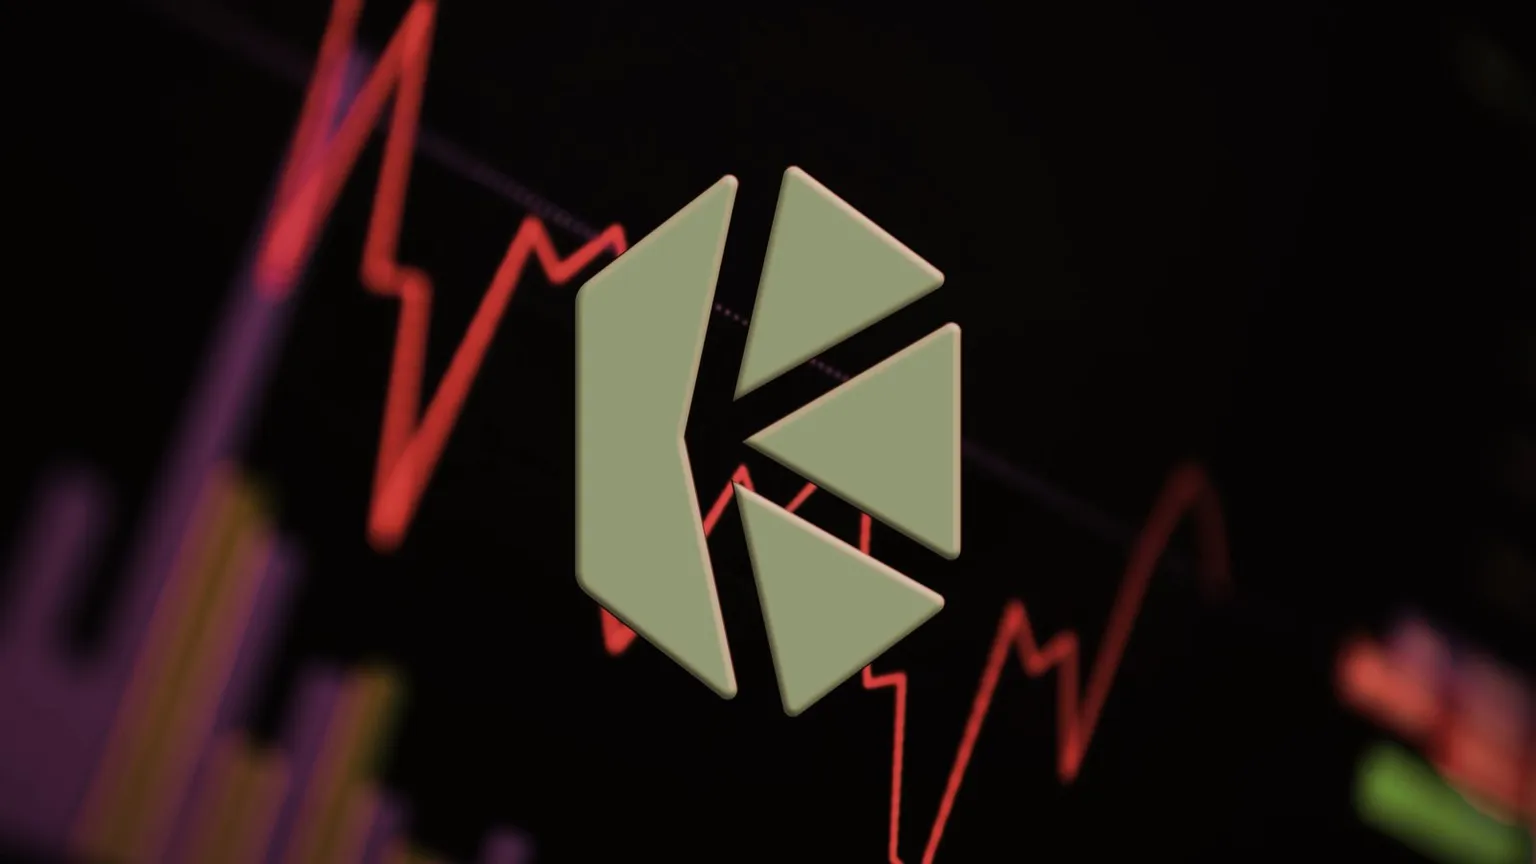 Kyber Network is a liquidity protocol built on Ethereum. Image: Shutterstock